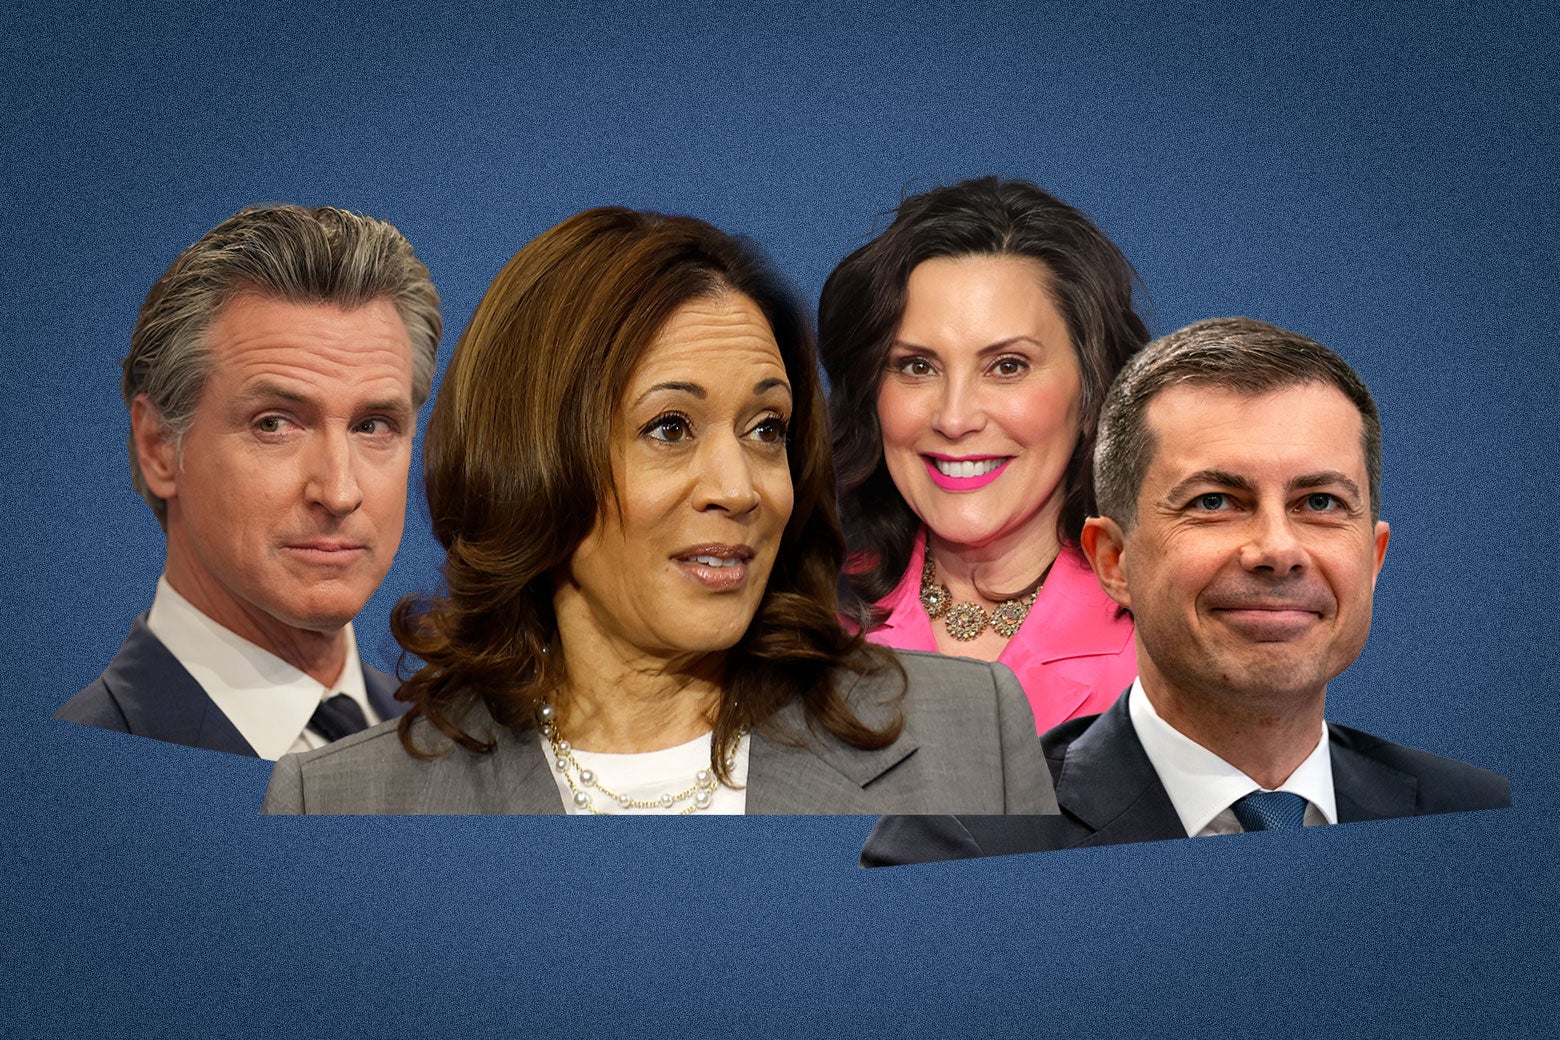 Sure, an Open Competition to Replace Biden Would Be Divisive and Chaotic. But So What?